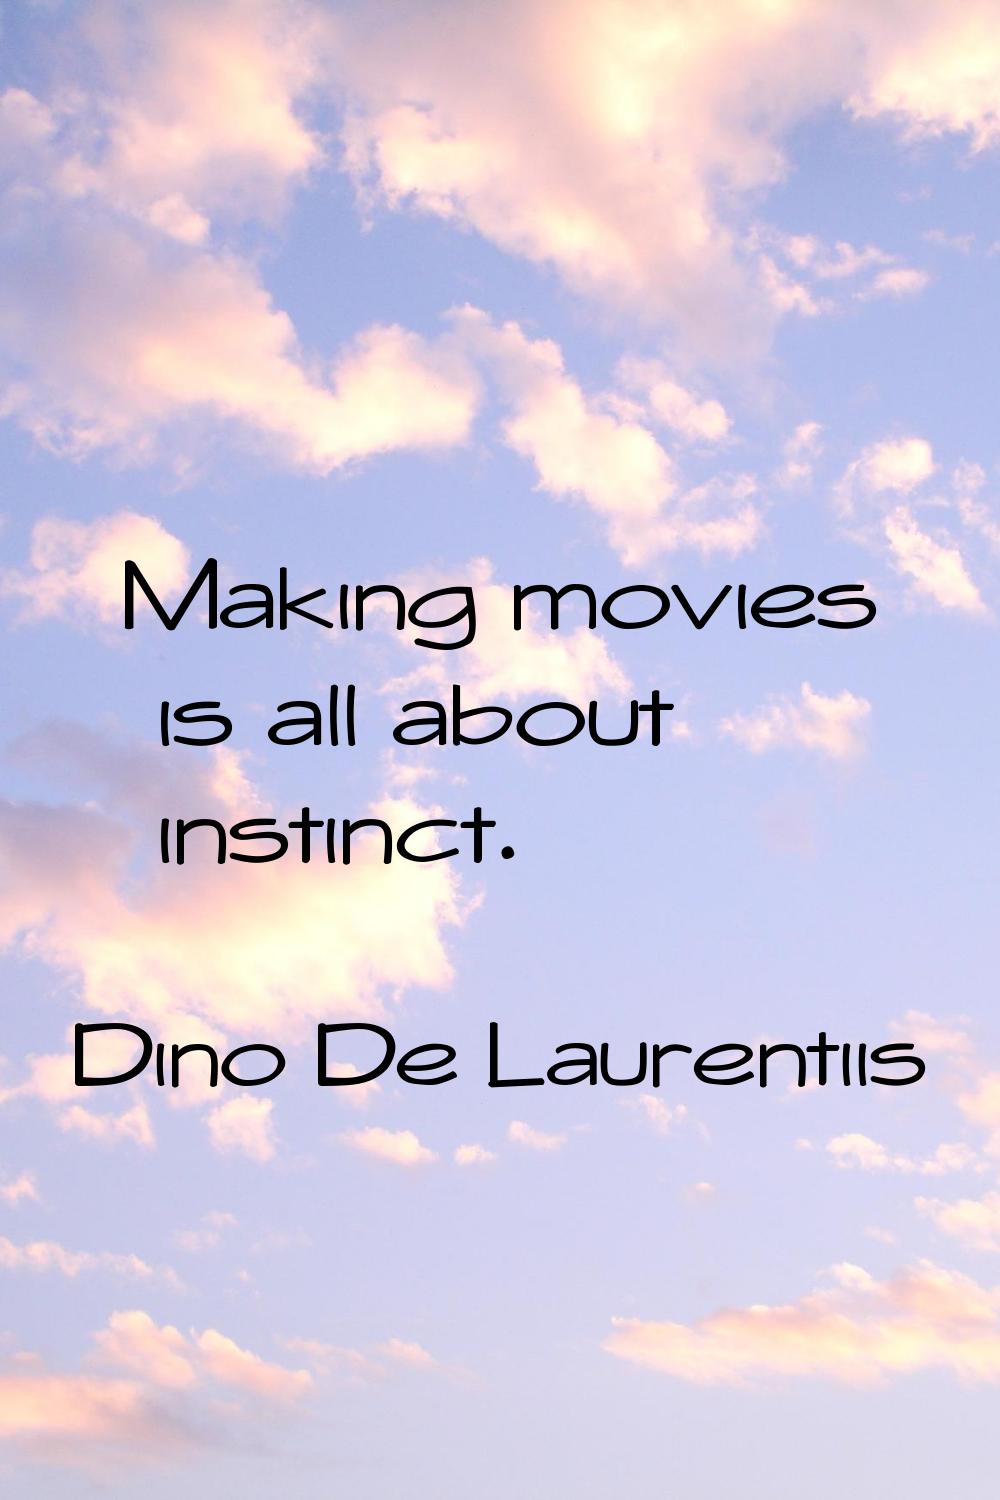 Making movies is all about instinct.